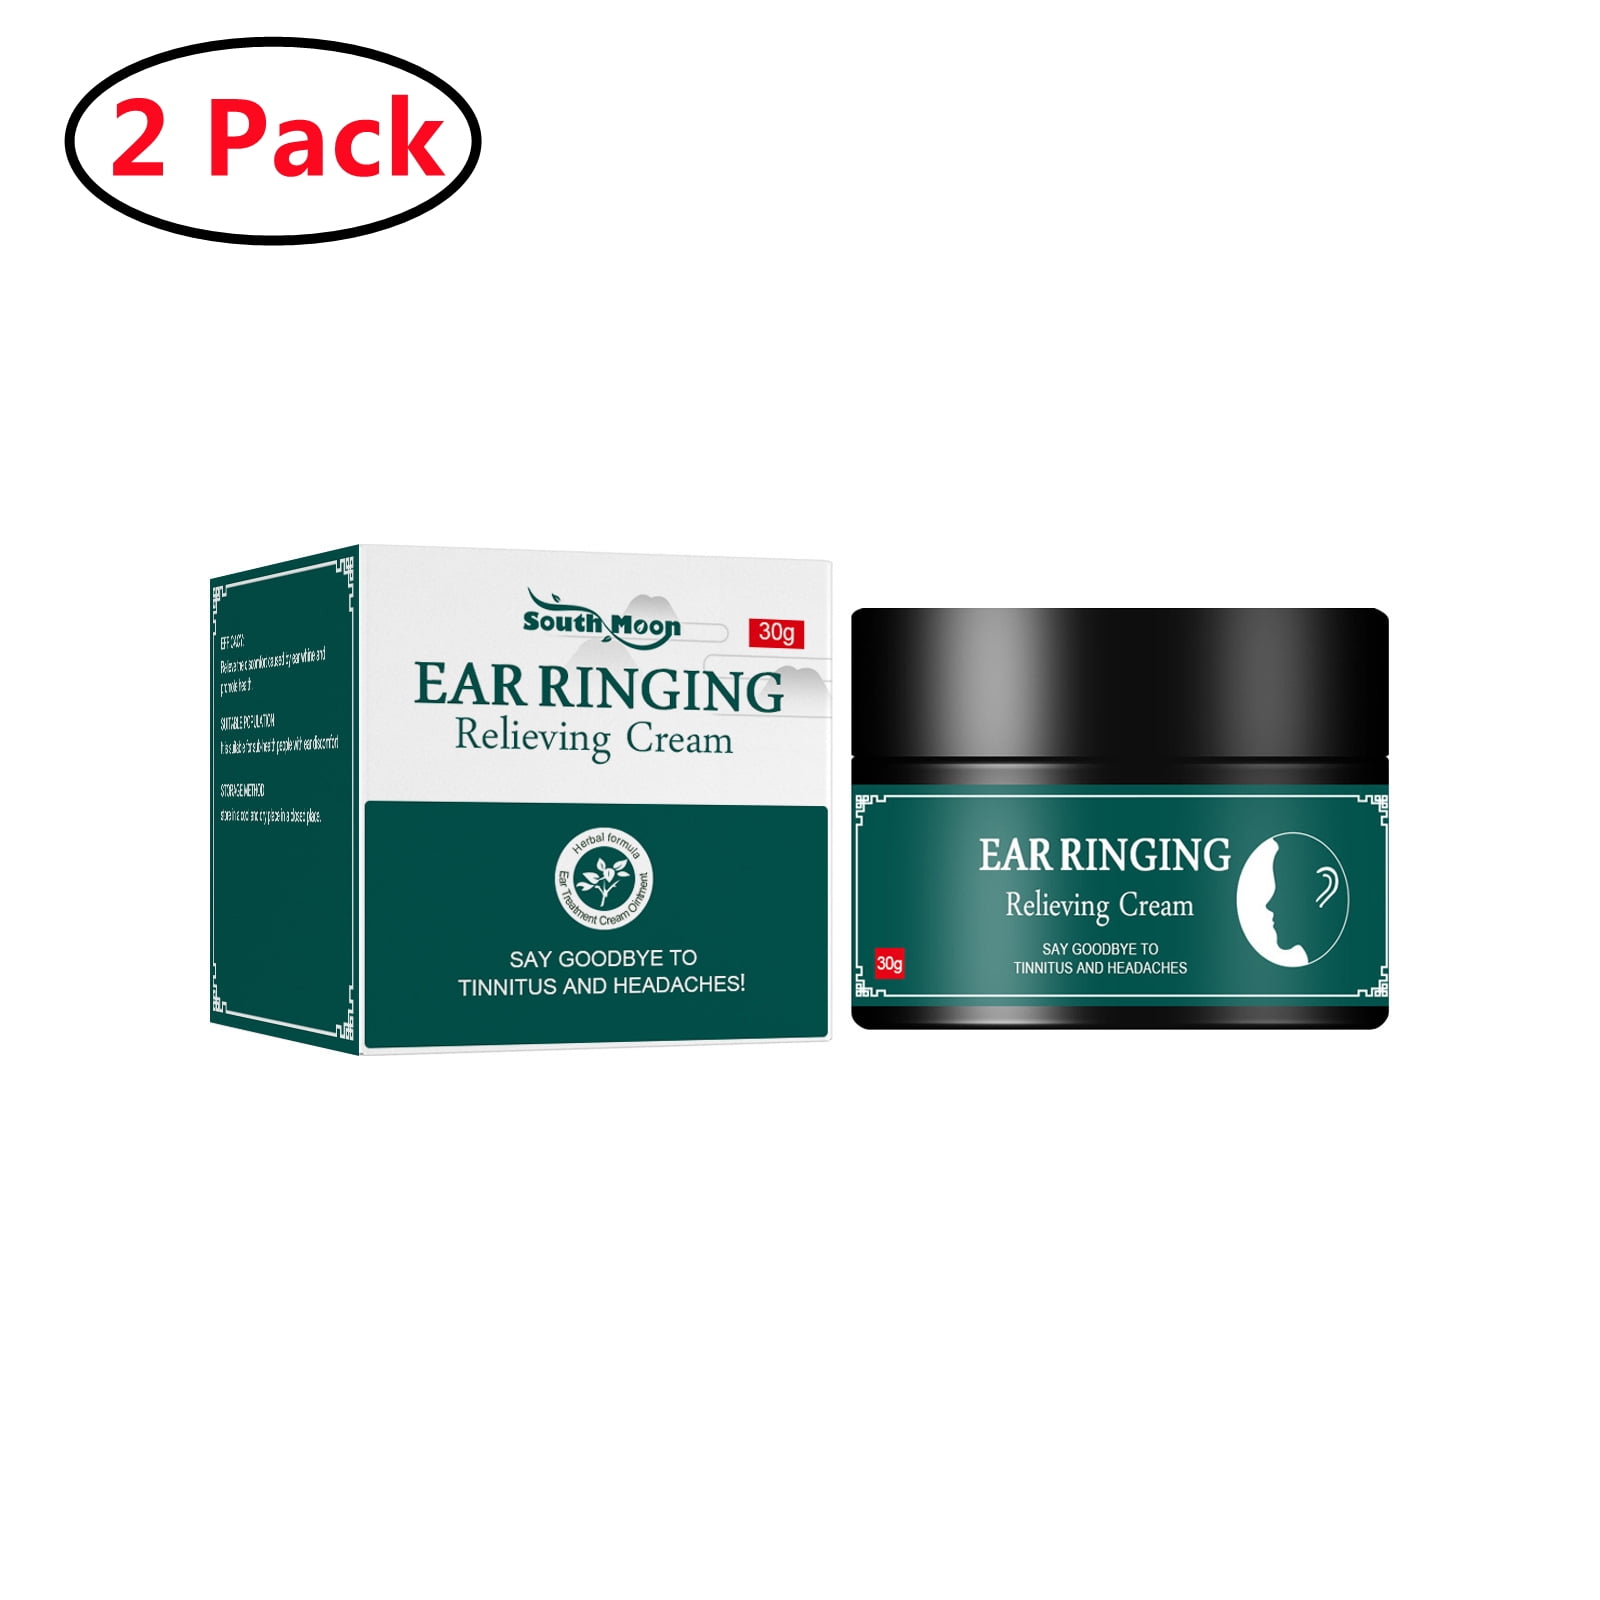 2 Pack Tinnitus Itching Ringing Infections Clogged Ears Relief 82122f8a d7da 473f a649 0169004b4eee.4050528c509d71f0d836d42b33fa4908